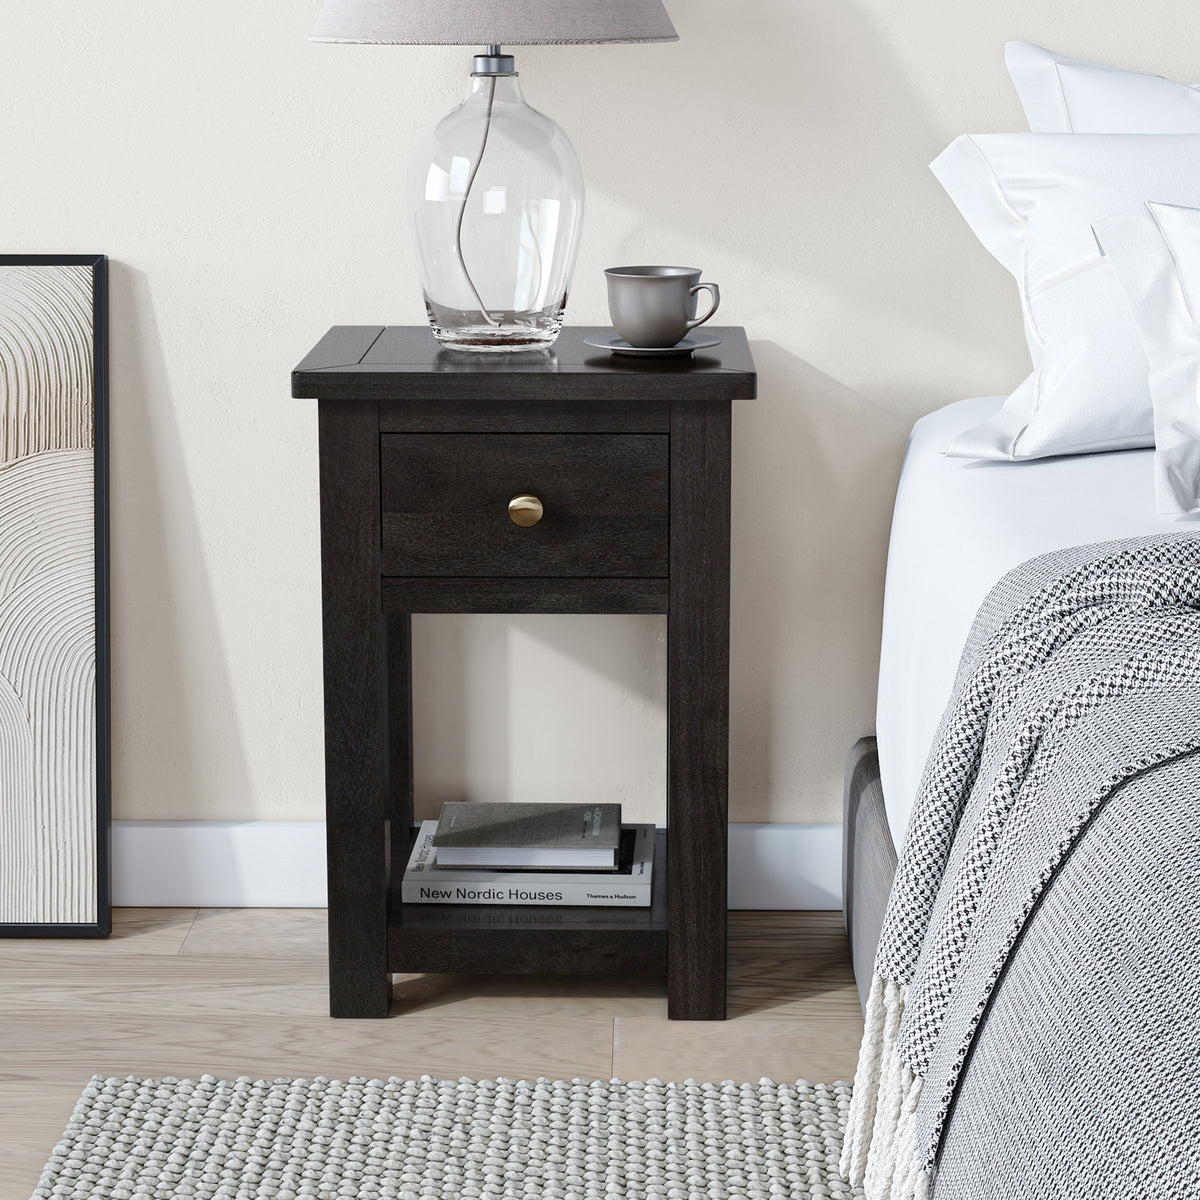 Duchy Acacia 1 Drawer Black Bedside Table for Bedroome